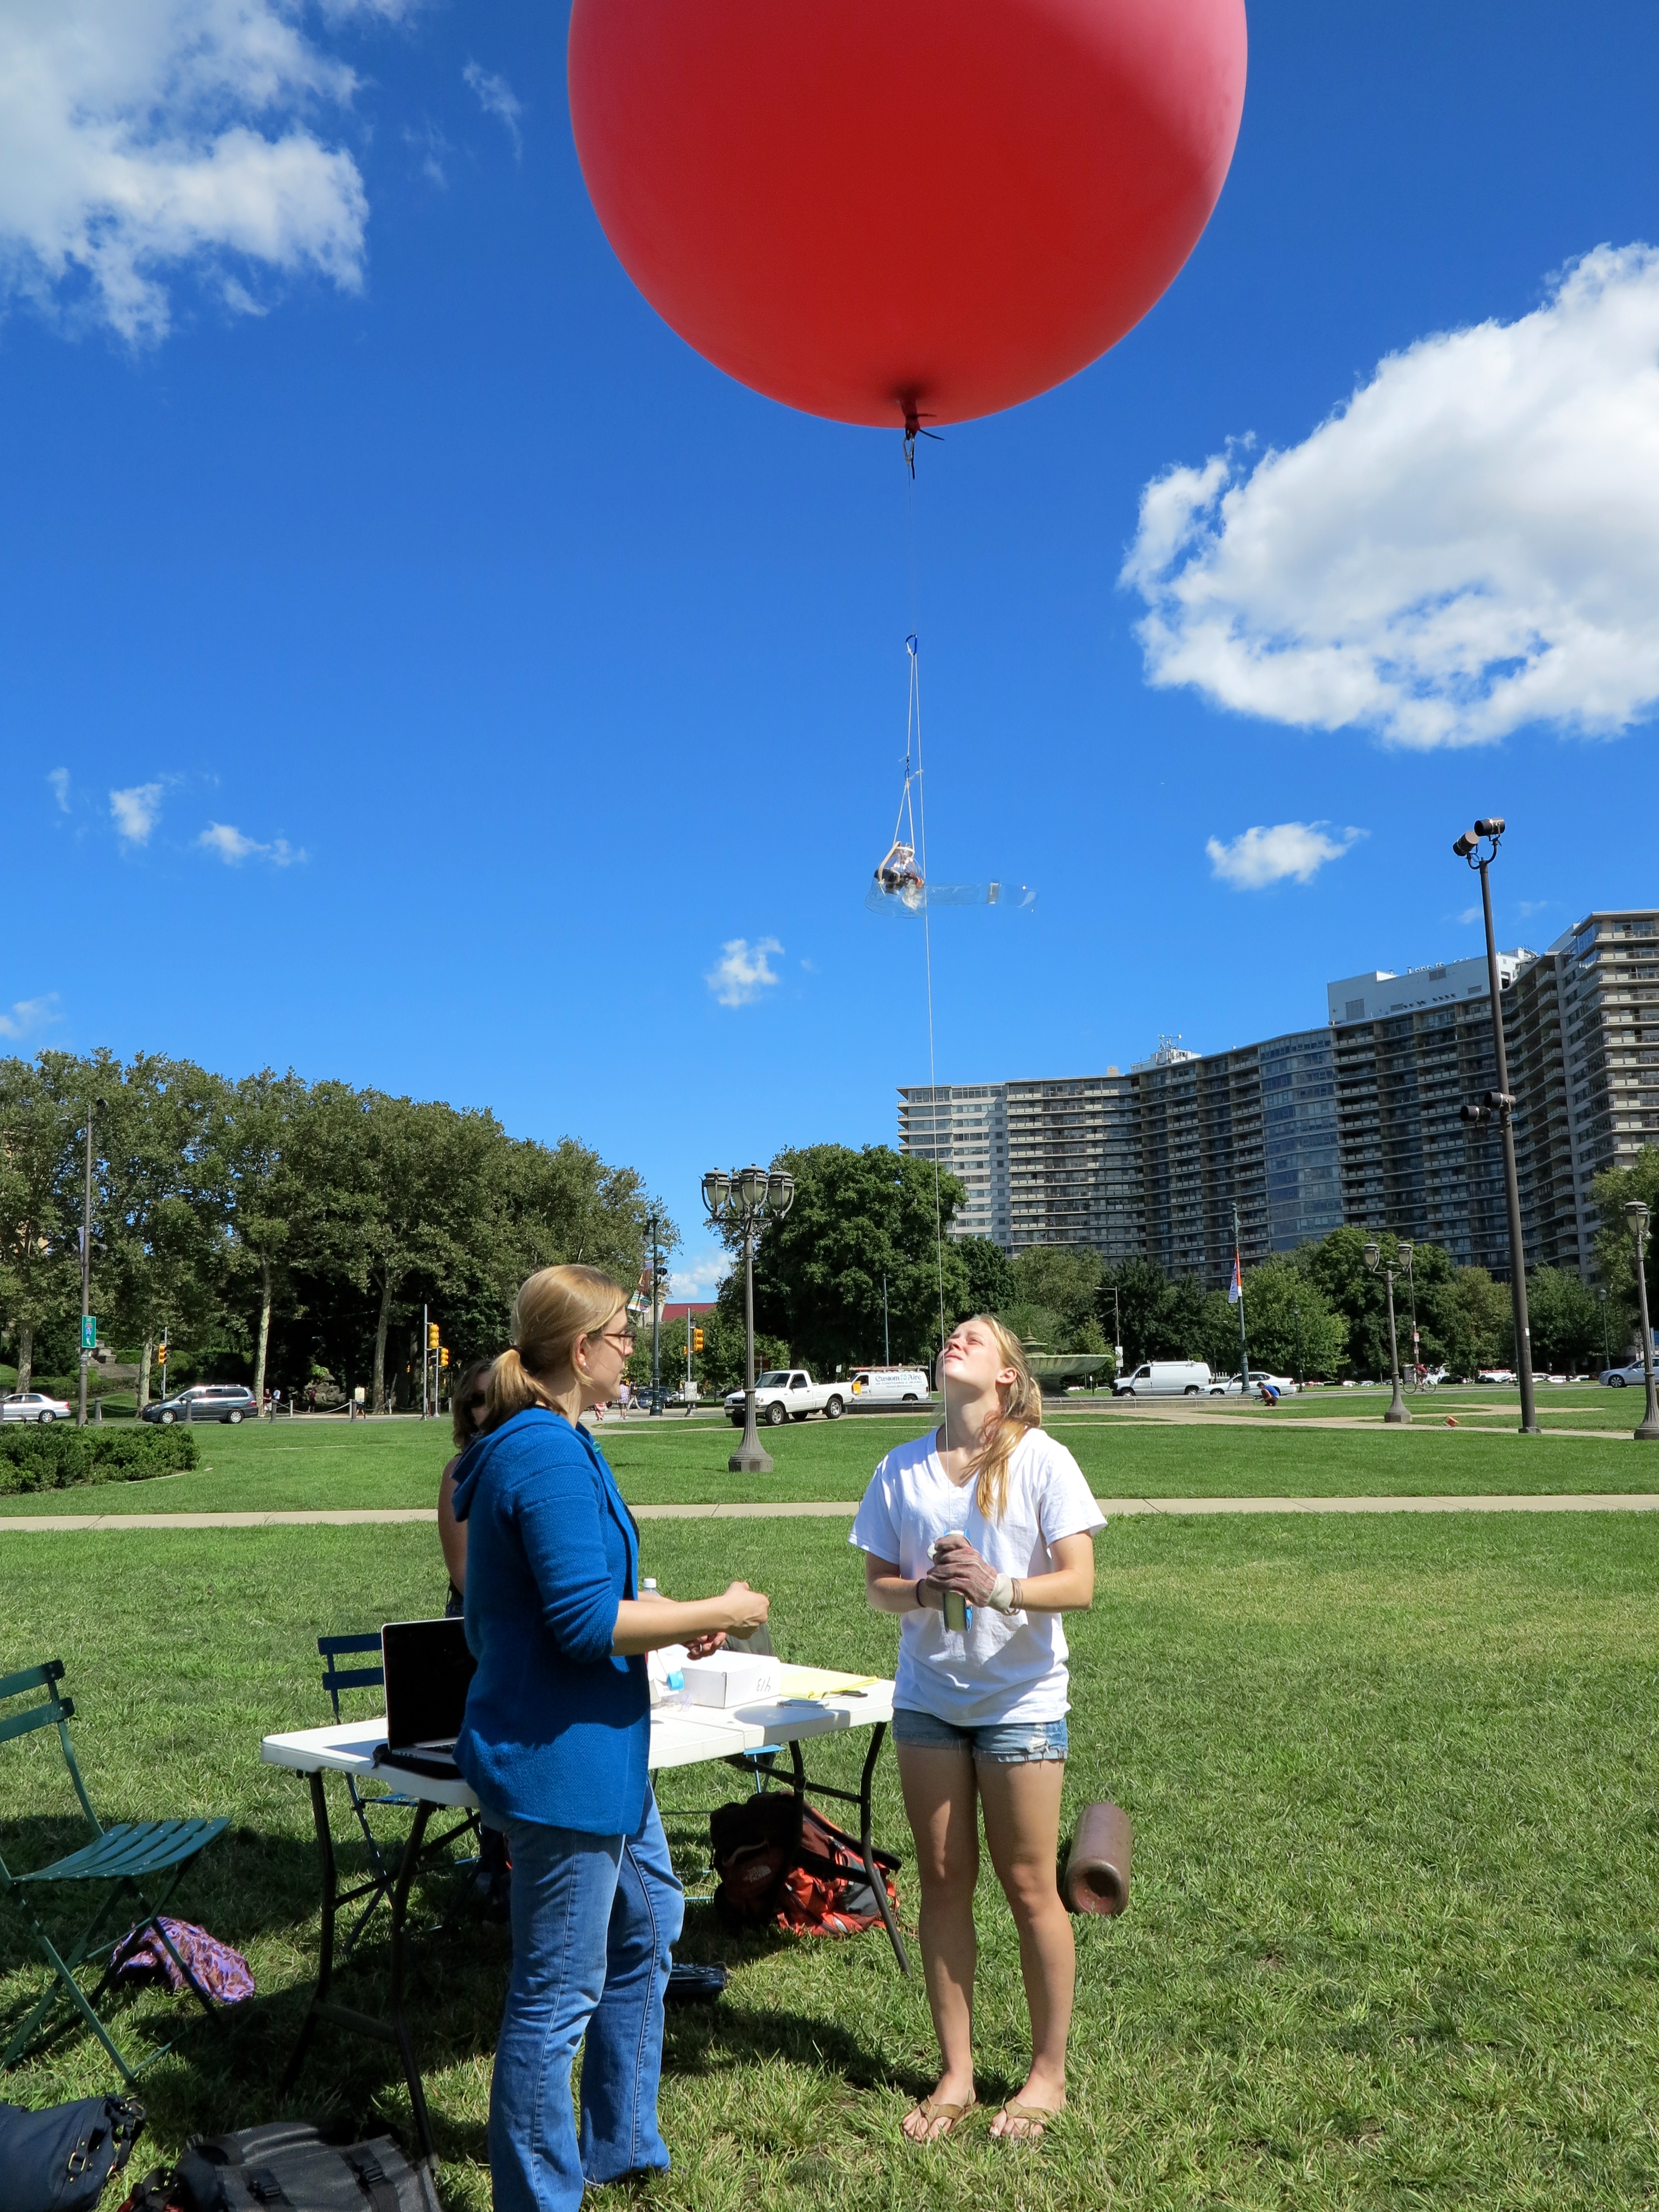 Dana Bauer and Swarthmore intern Megan Brock getting ready to send the balloon up again. 